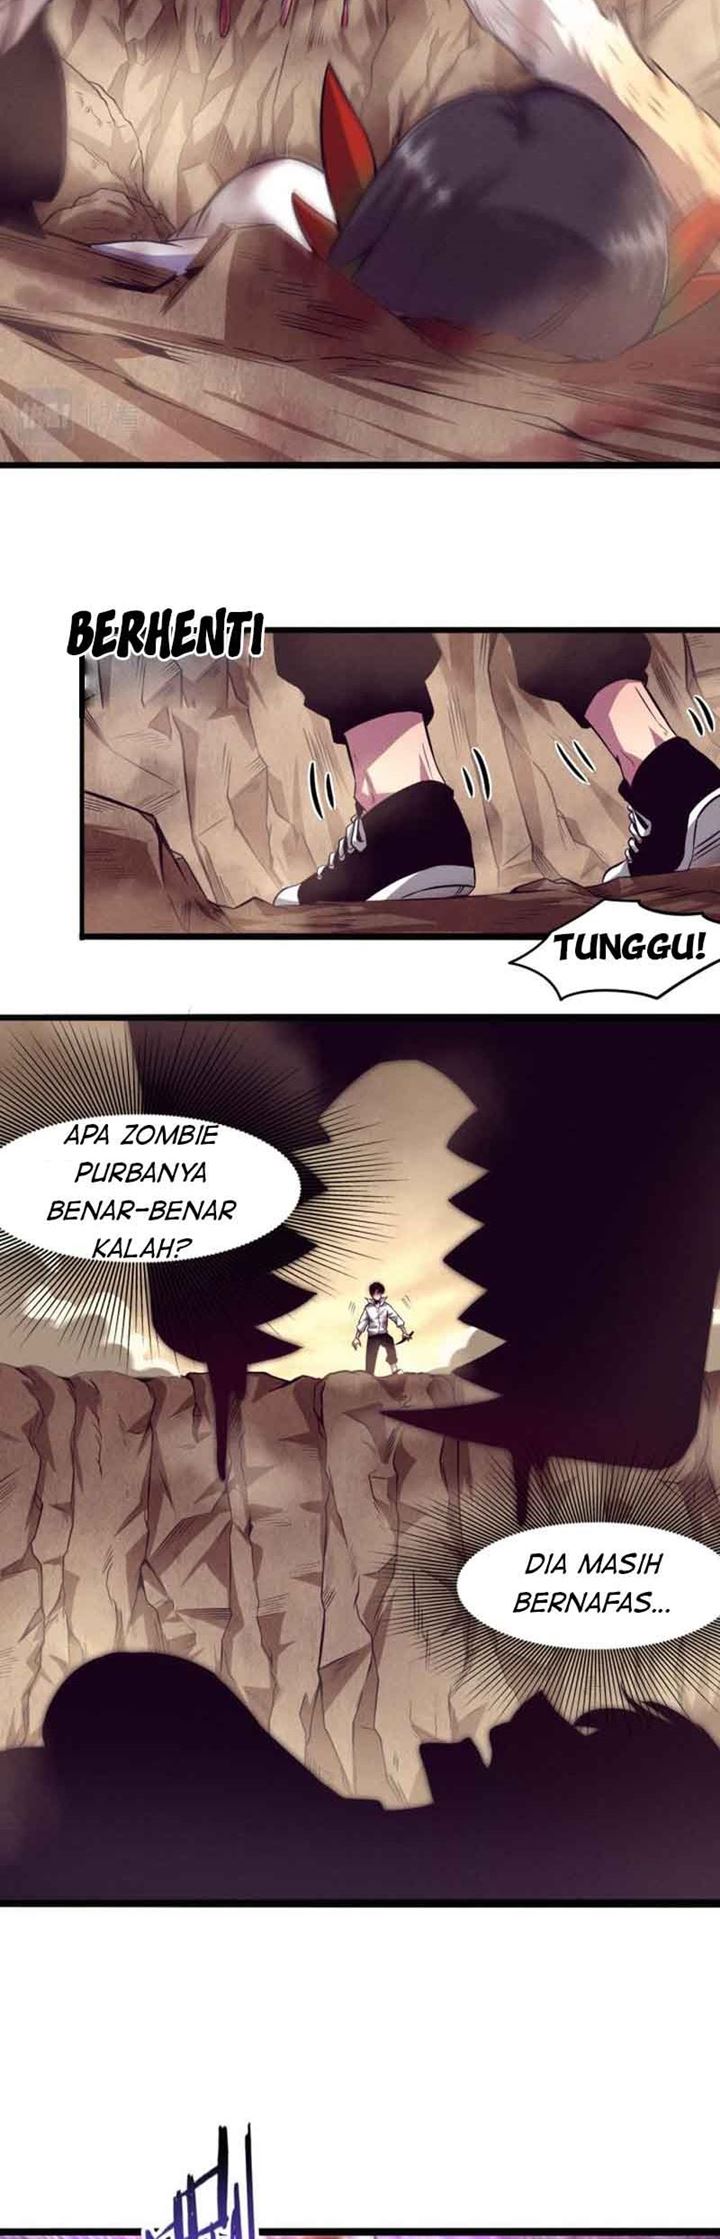 Evolution frenzy Chapter 09 bahasa indoensia